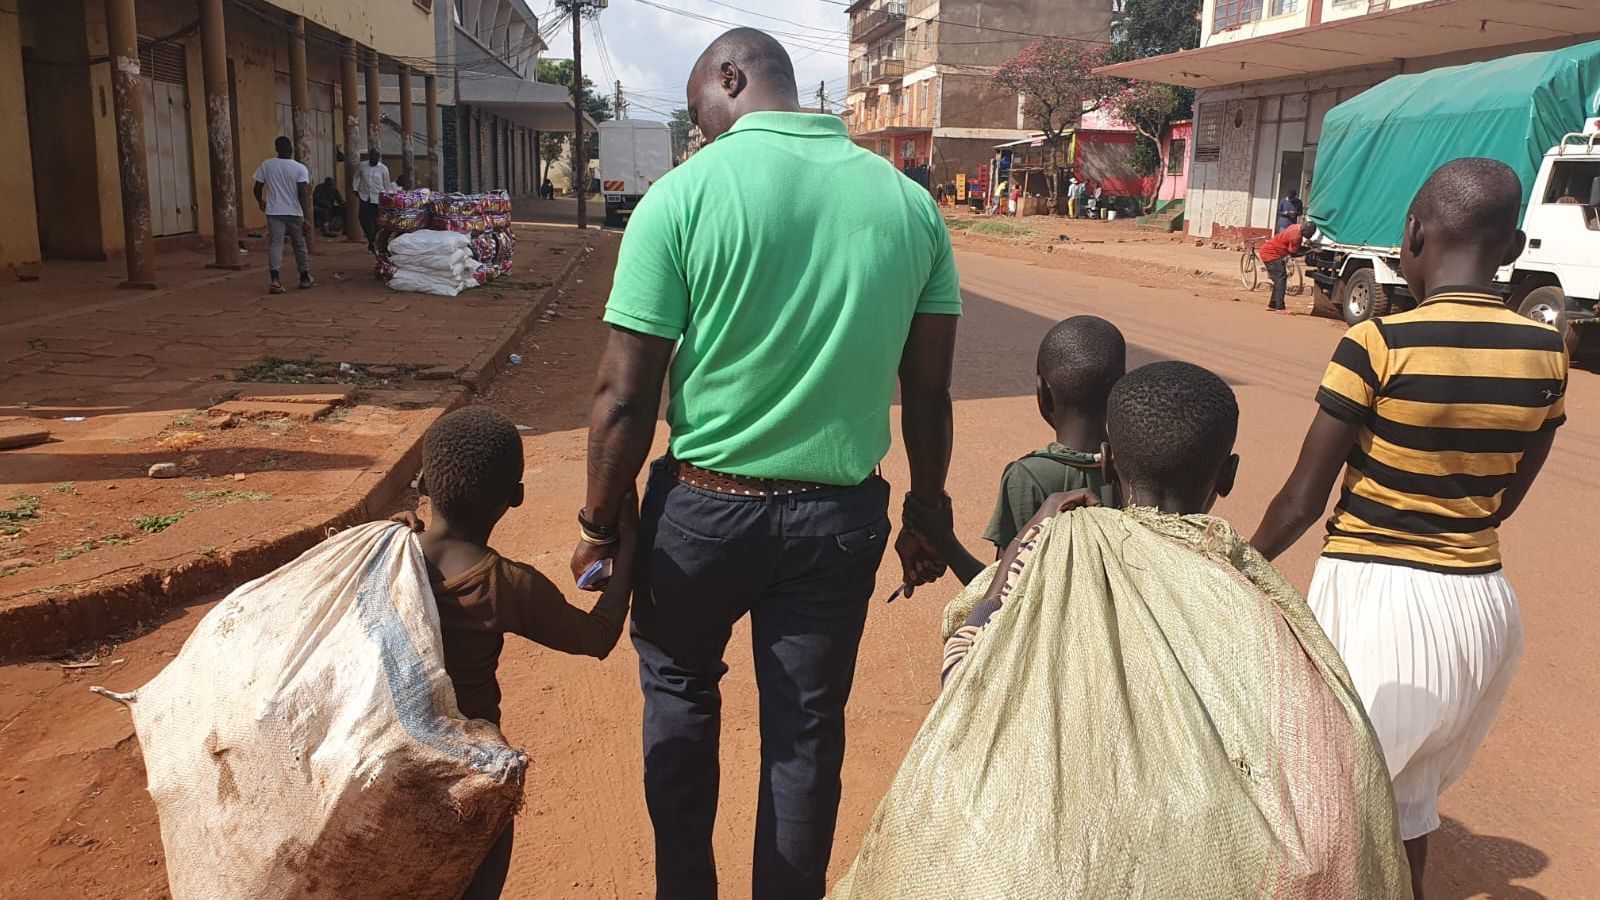 Alfred walking with children on the street